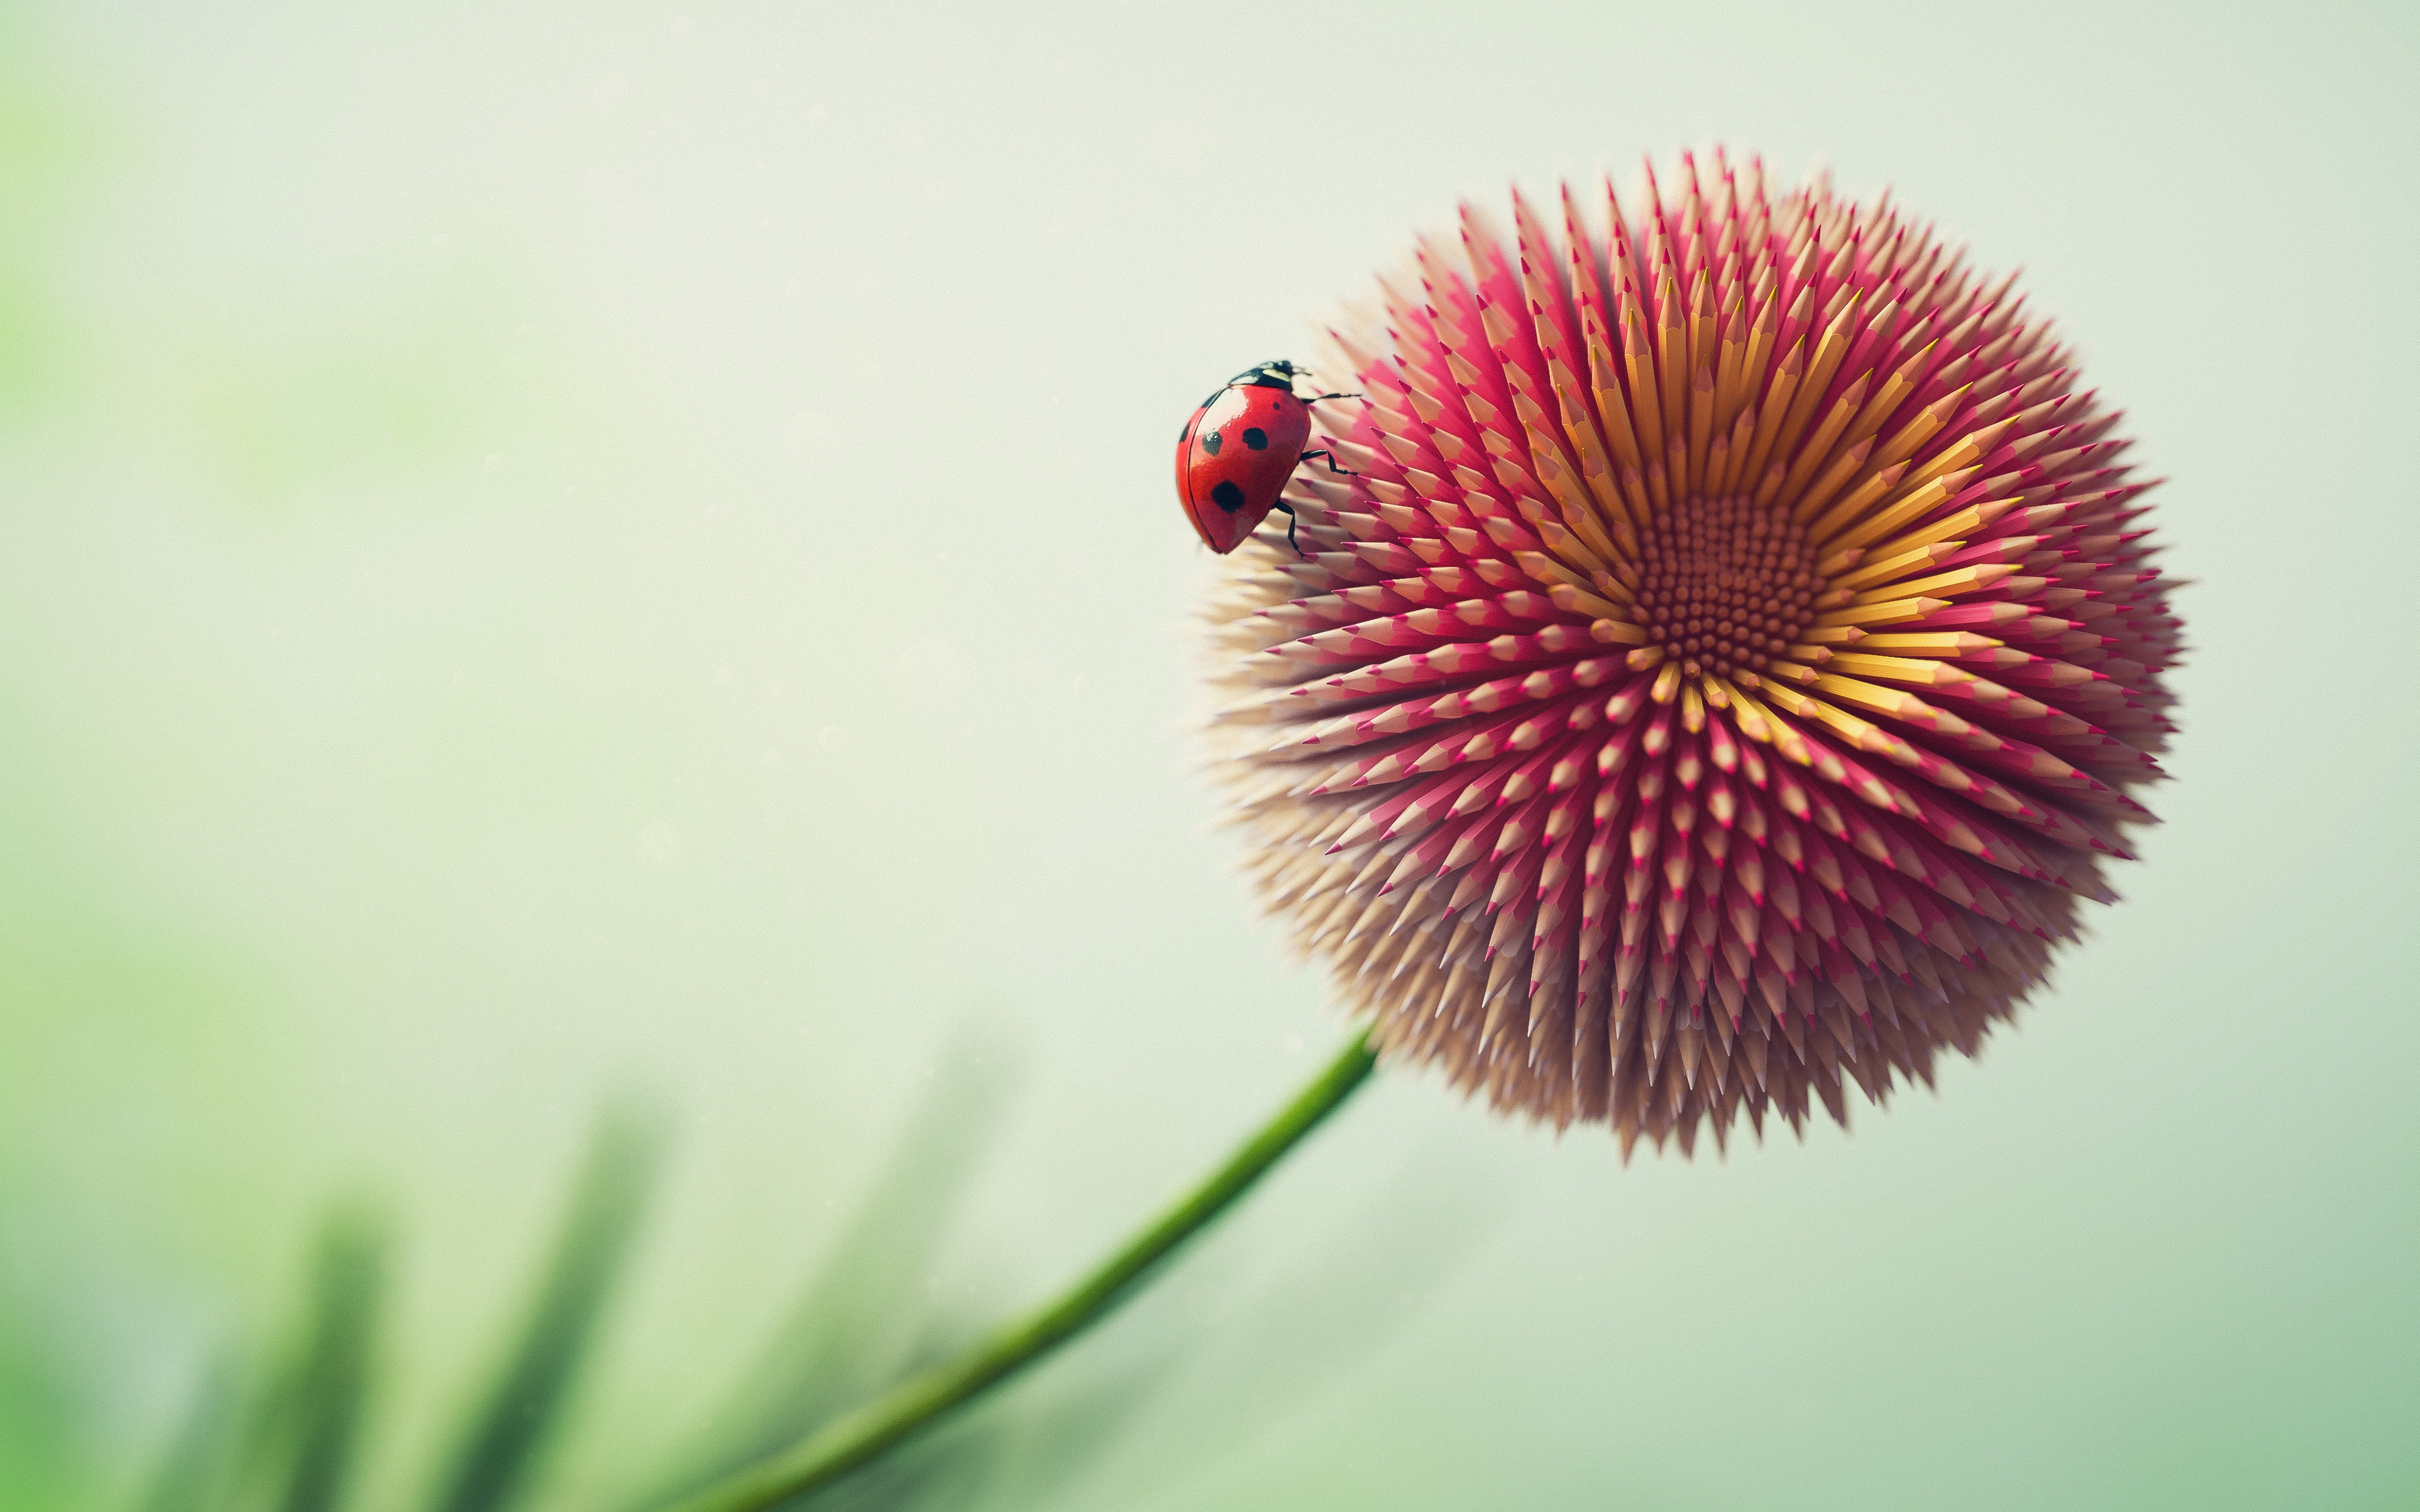 Wallpapers bud insect ladybug on the desktop